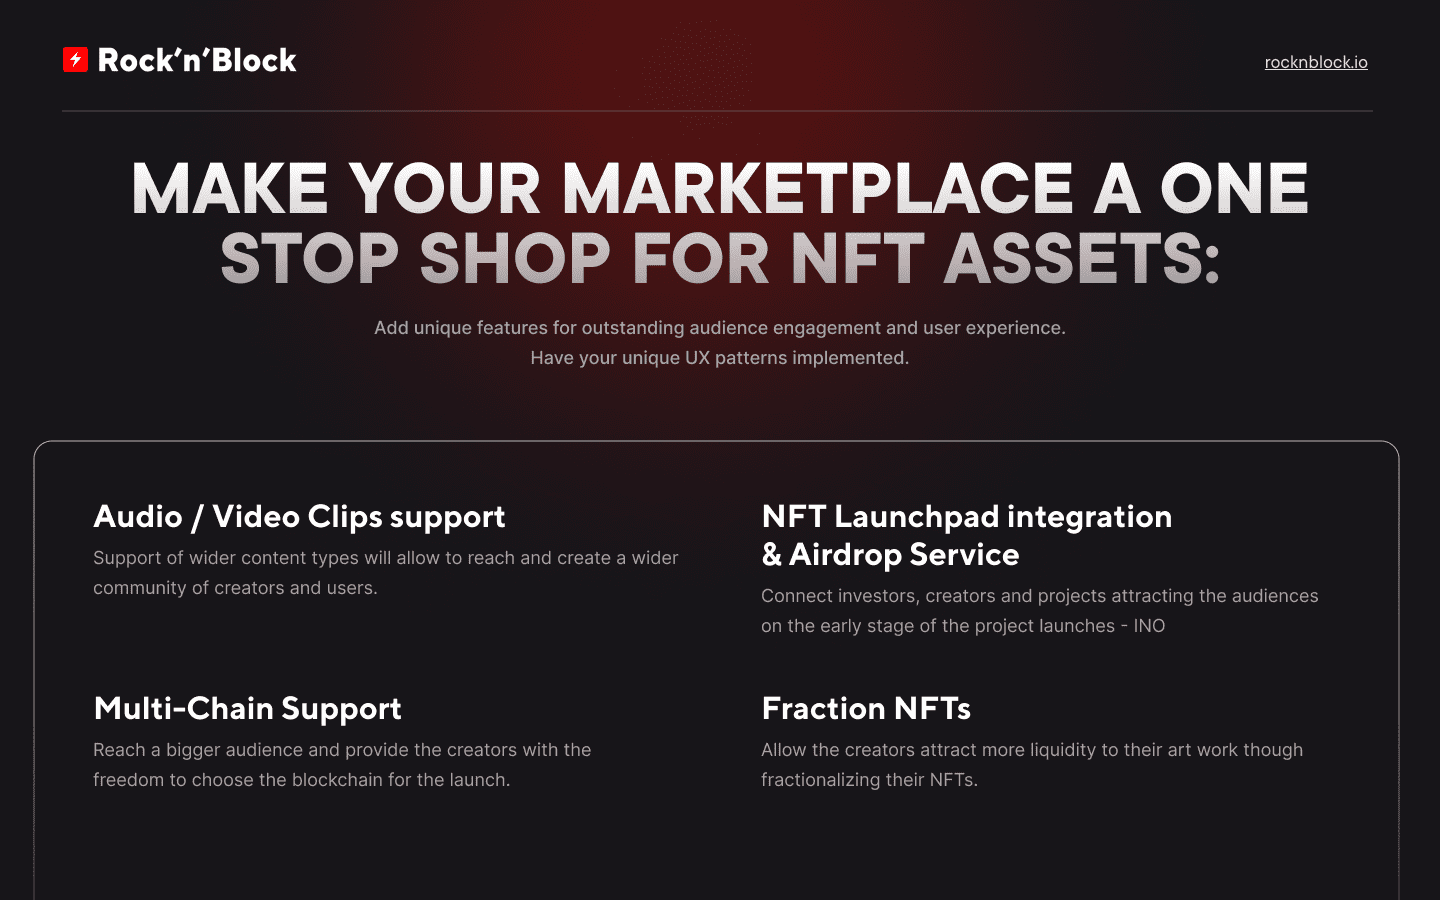 NFT Marketplace features for scaling the project. Making your NFT Marketplace a one stop shop for NFT